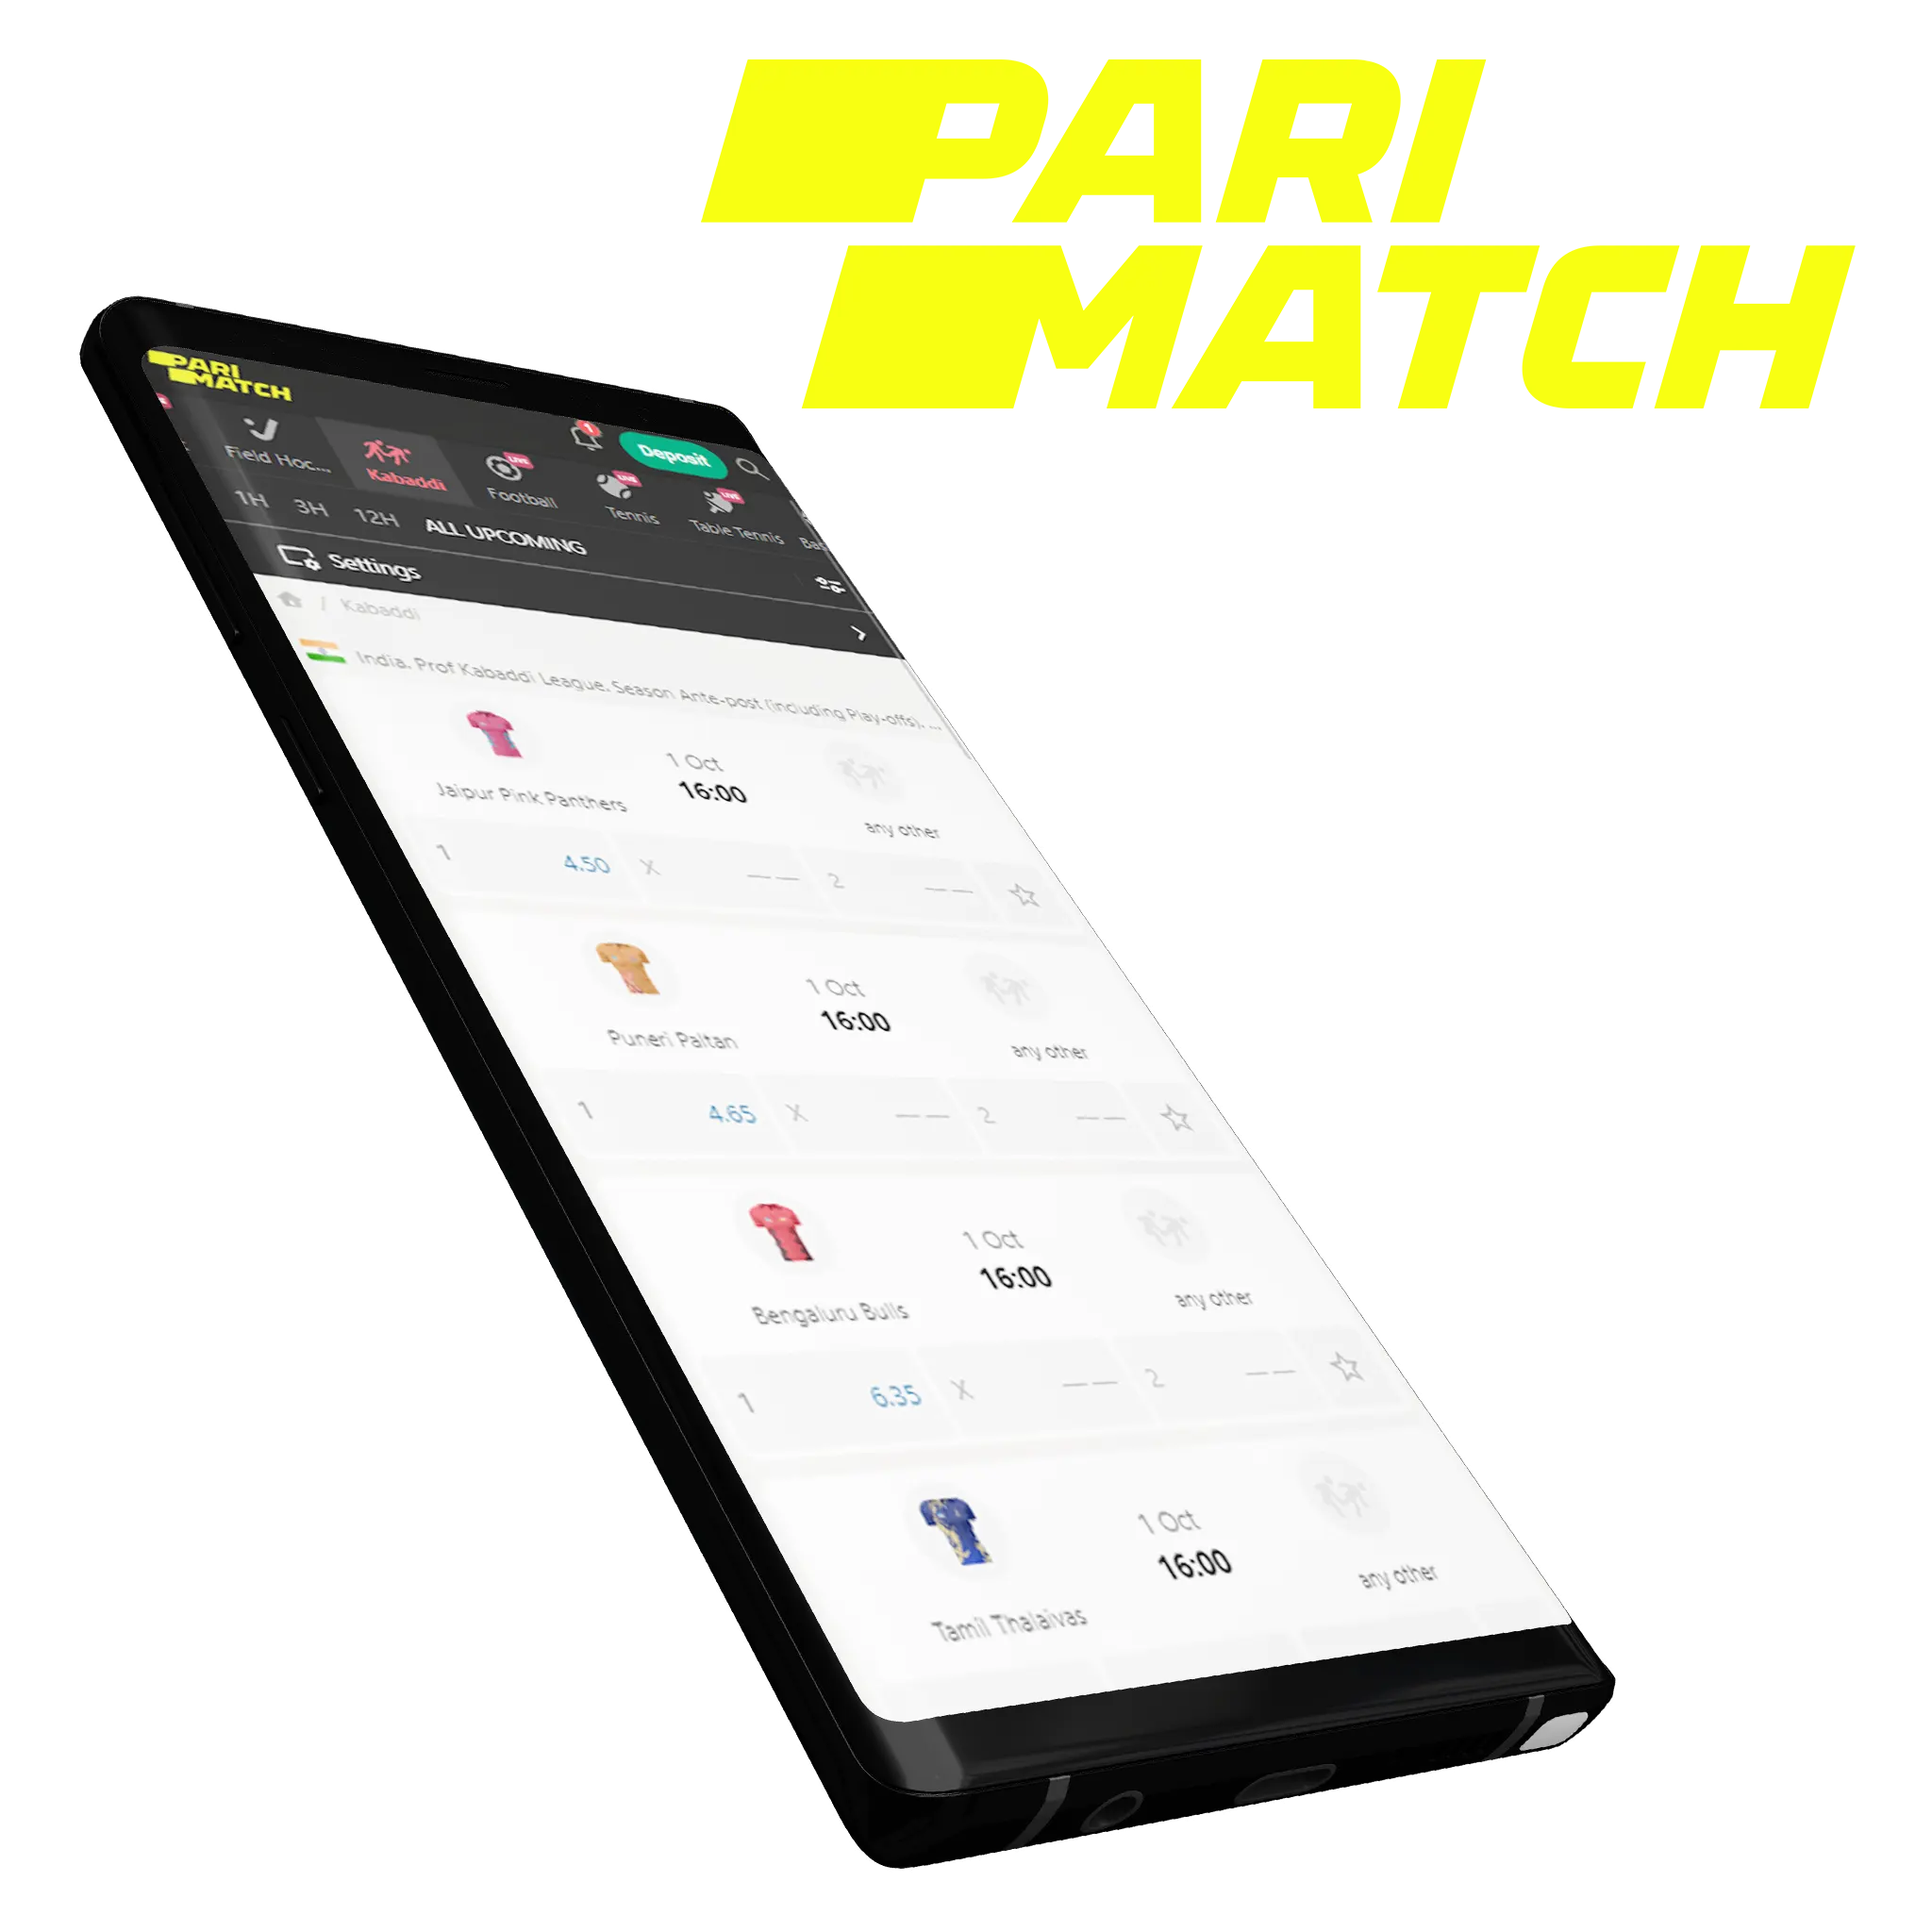 Parimatch mobile app is popular among Indian users for betting on kabaddi.